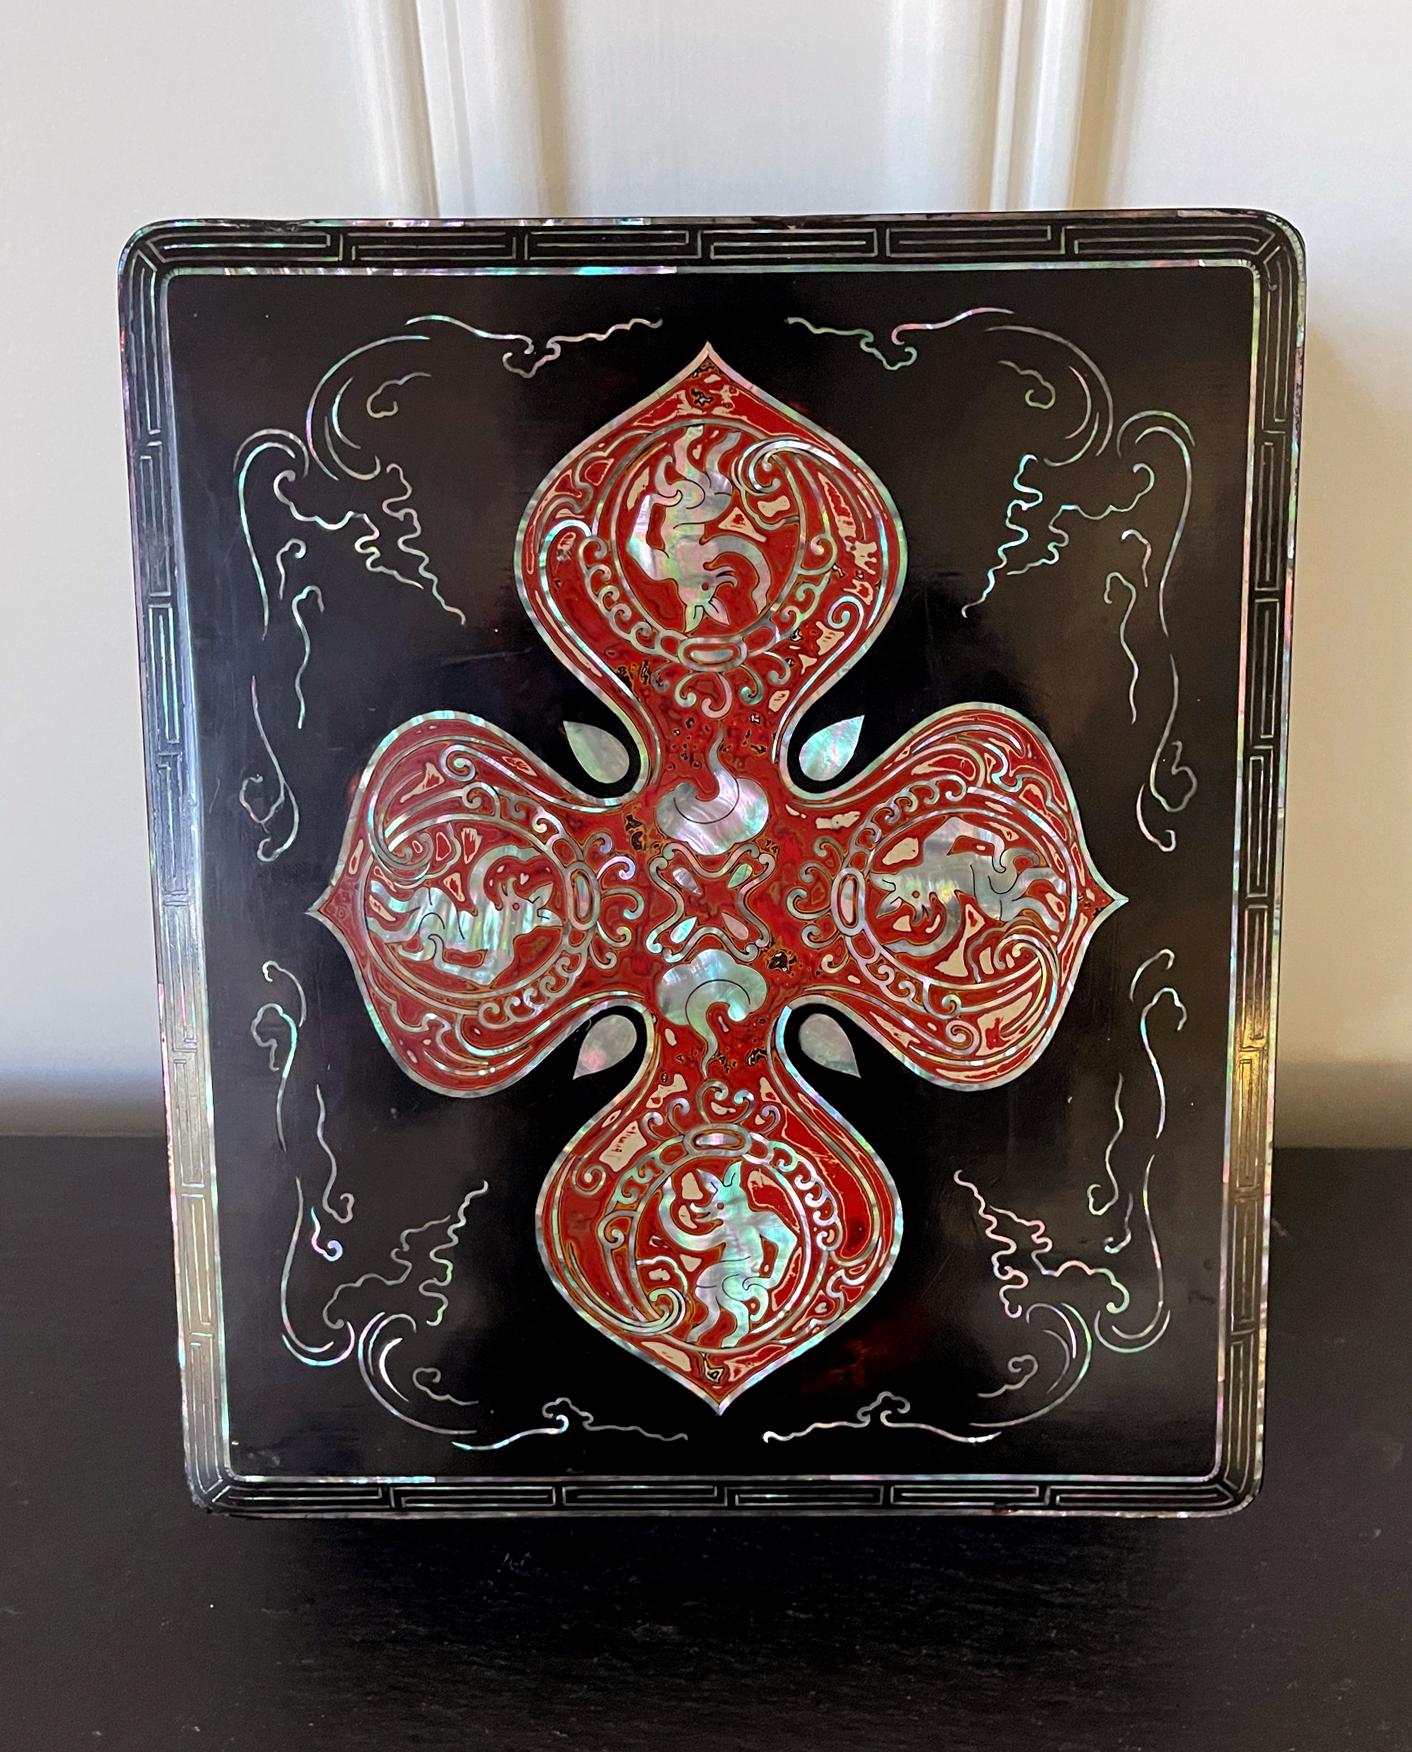 A Japanese black lacquer box with mother of pearl inlays circa early 20th century, end of Meiji period. It was likely to be used to store inkstone or other scholarly items. The piece displays several interesting characteristics that appear puzzling